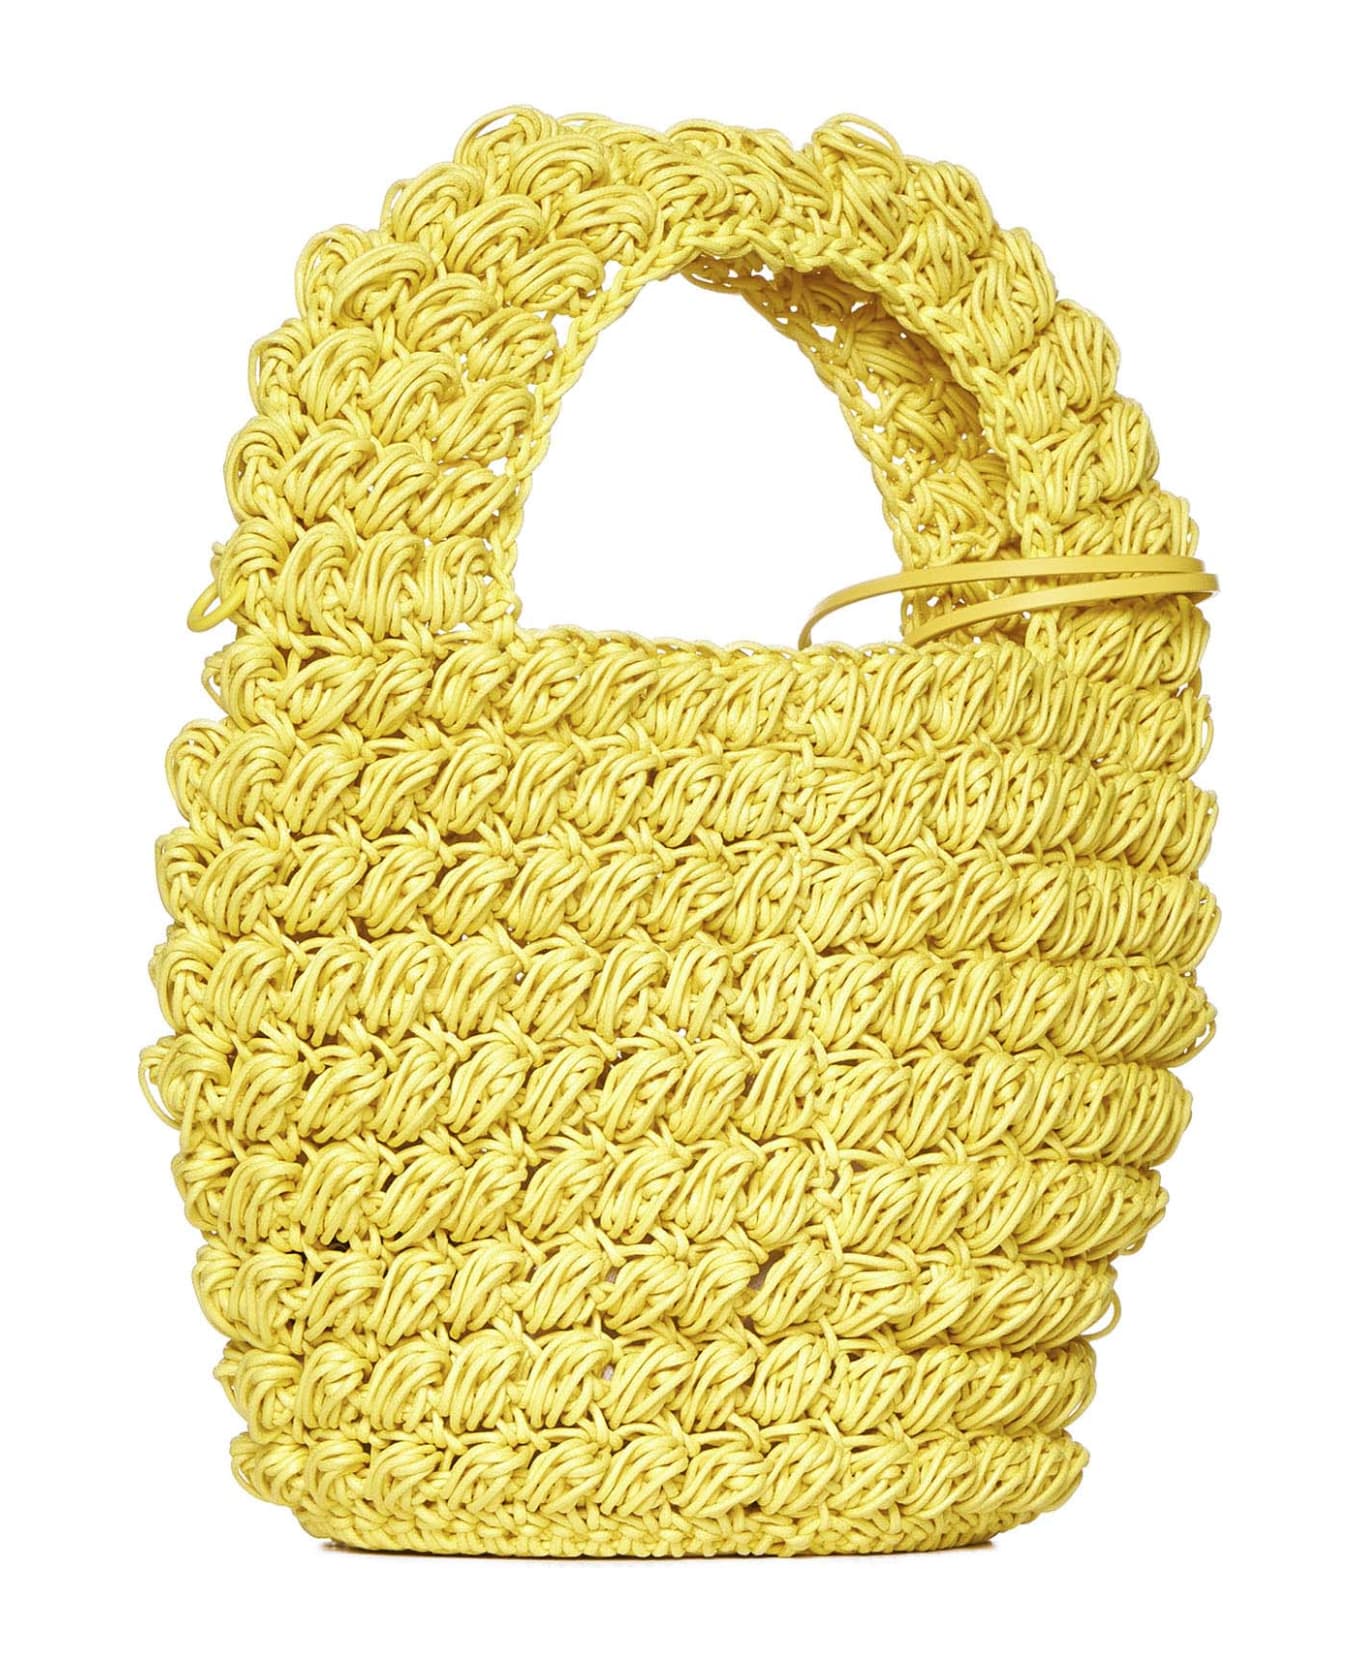 J.W. Anderson Tote - Yellow